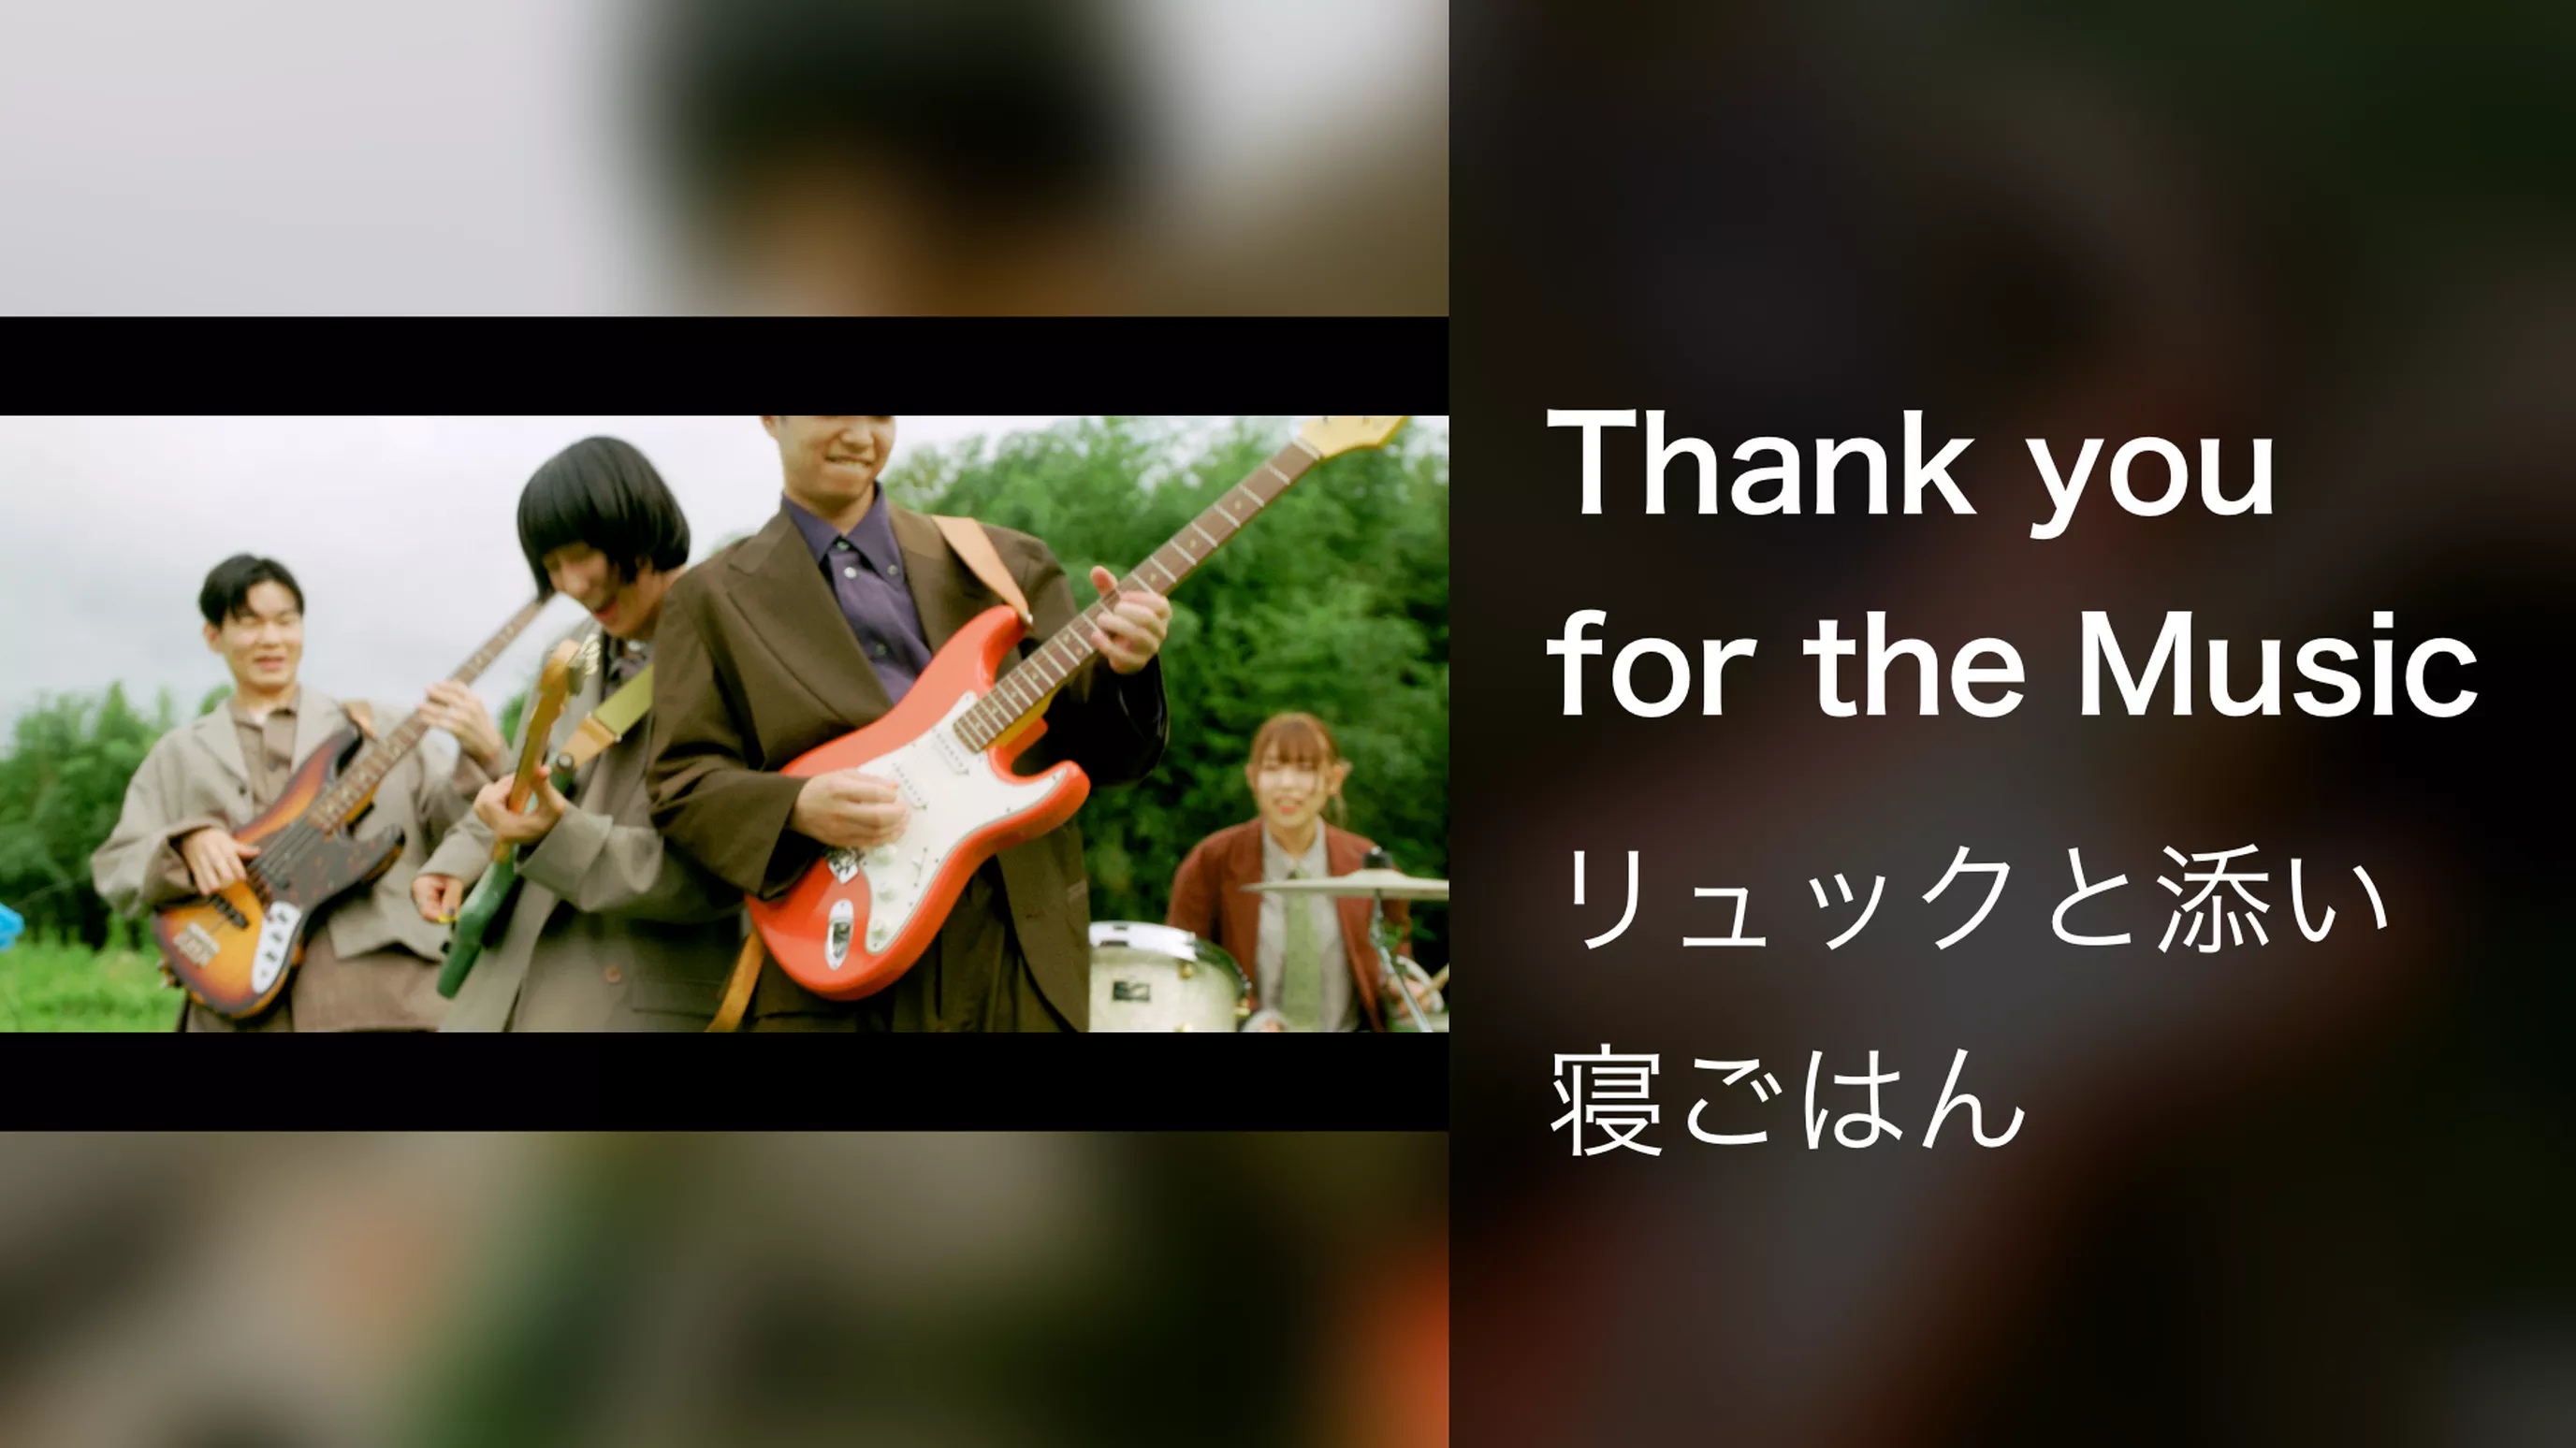 Thank you for the Music